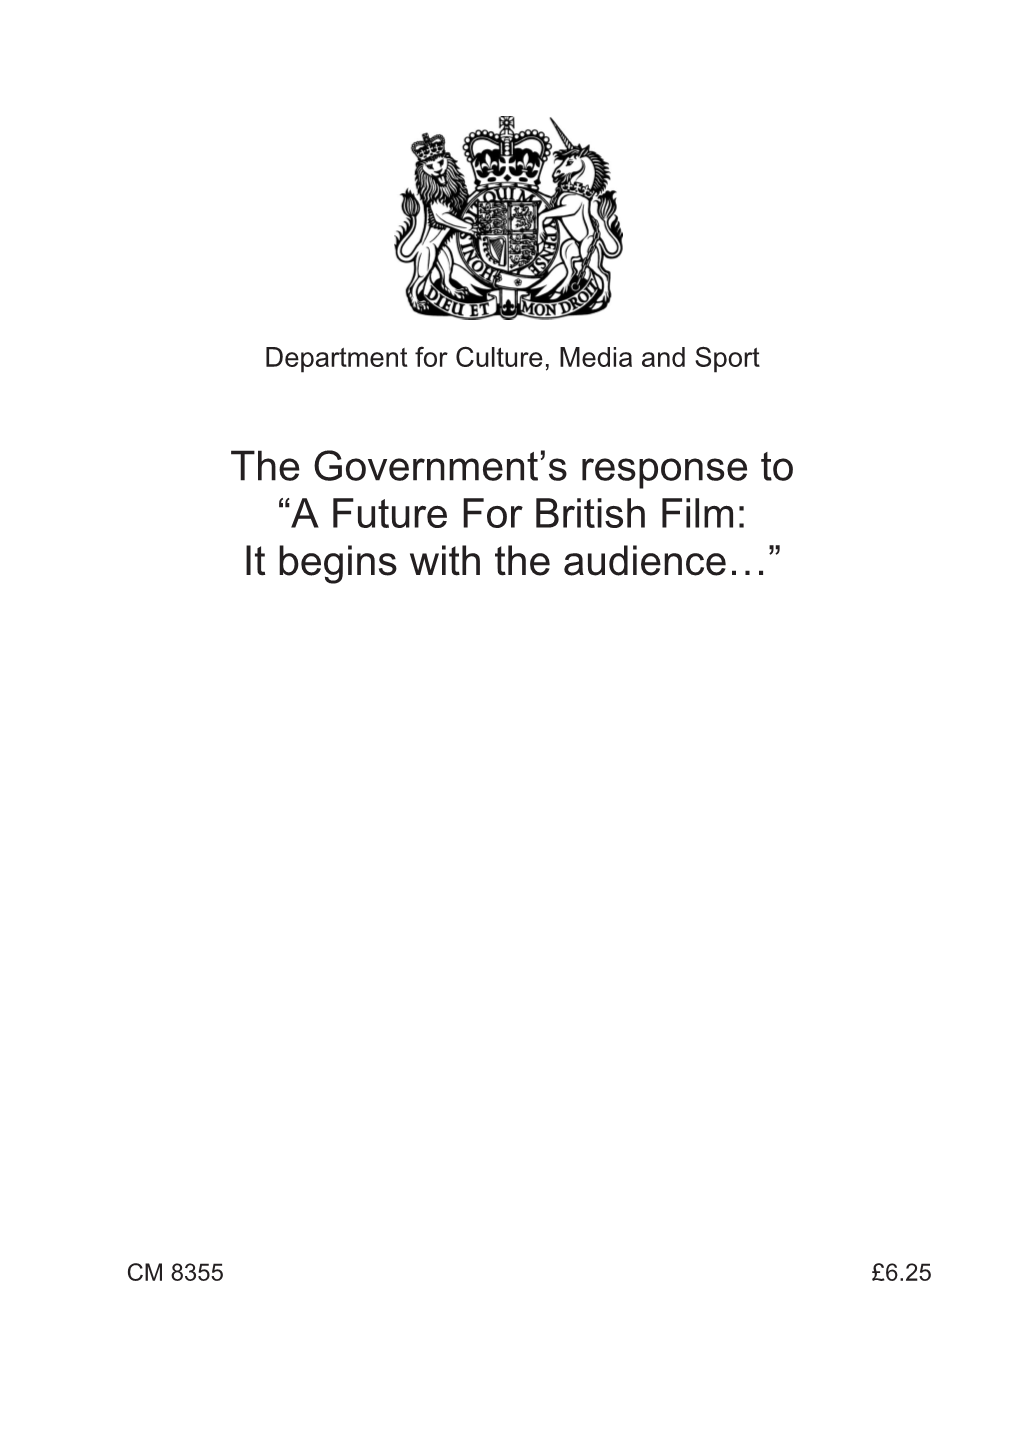 Cm 8355 the Government's Response to a Future for British Film: It Begins with the Audience